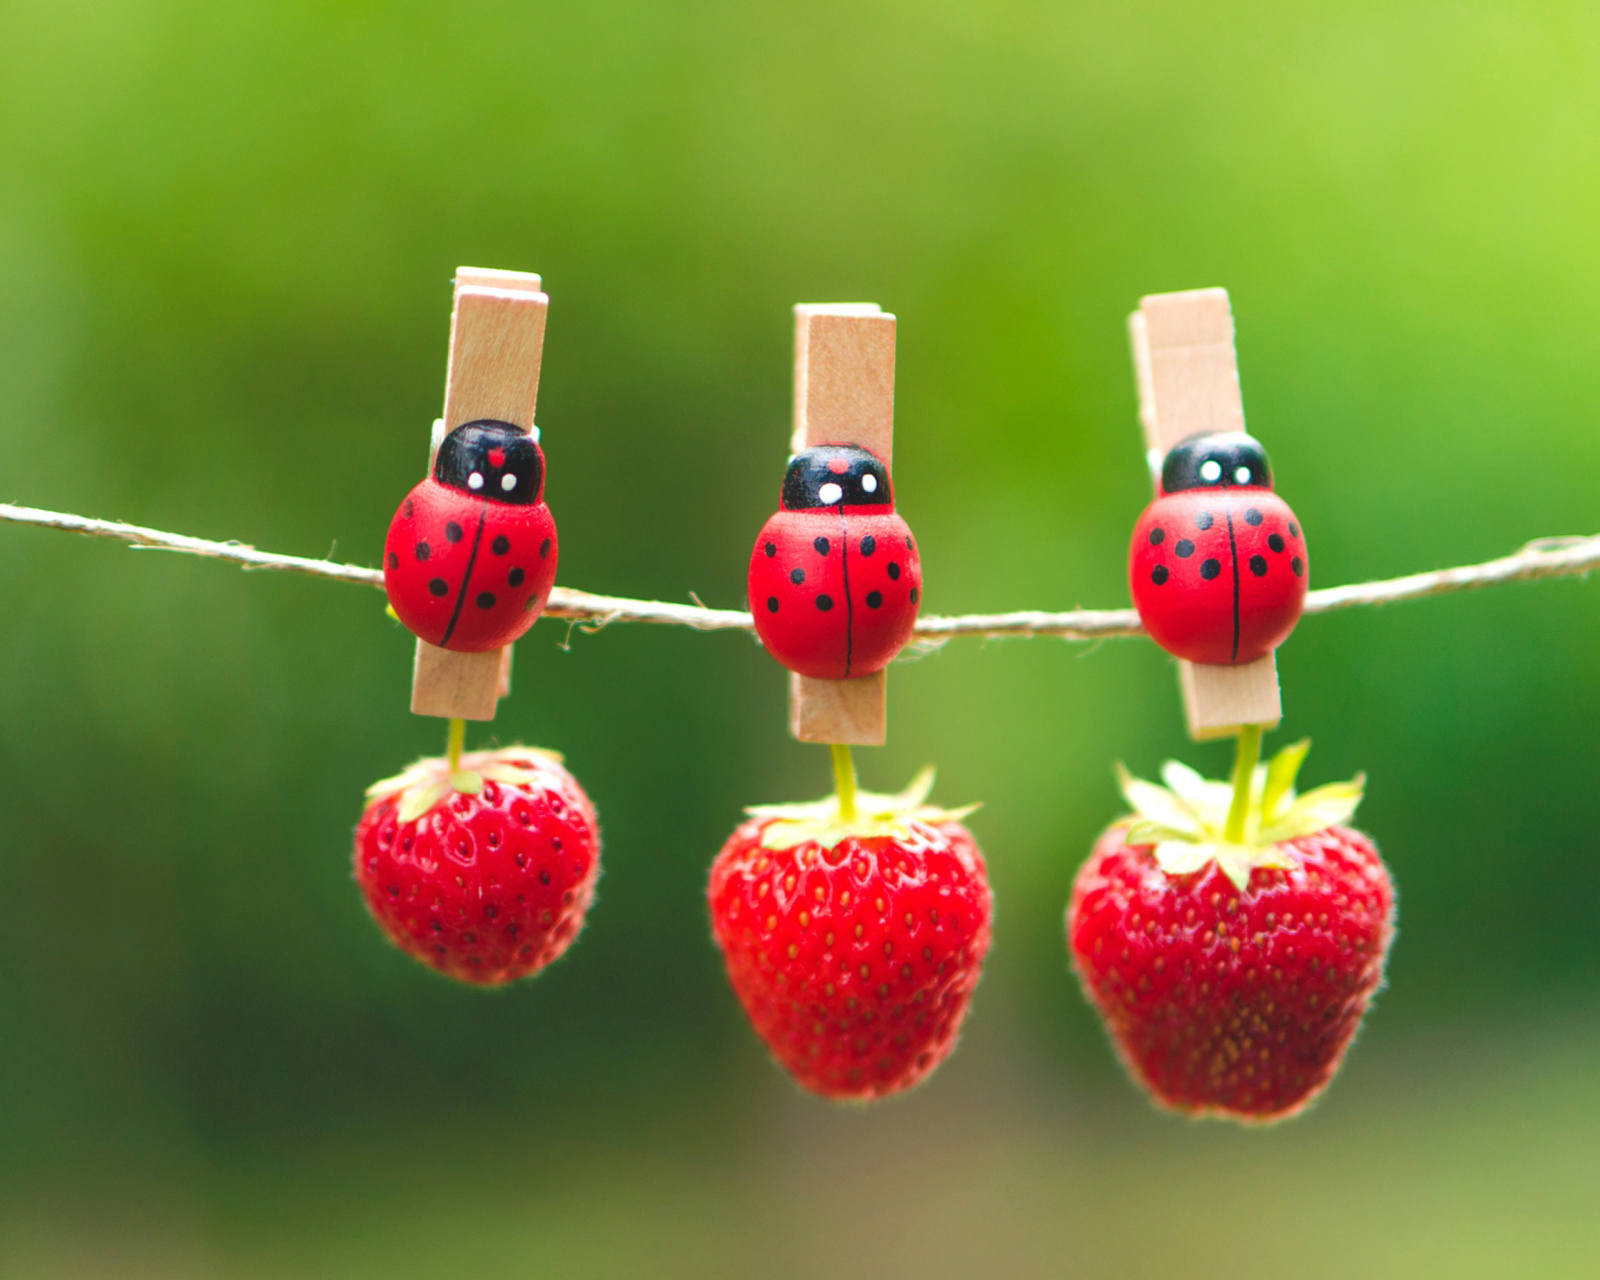 Ladybugs And Strawberries wallpaper 1600x1280